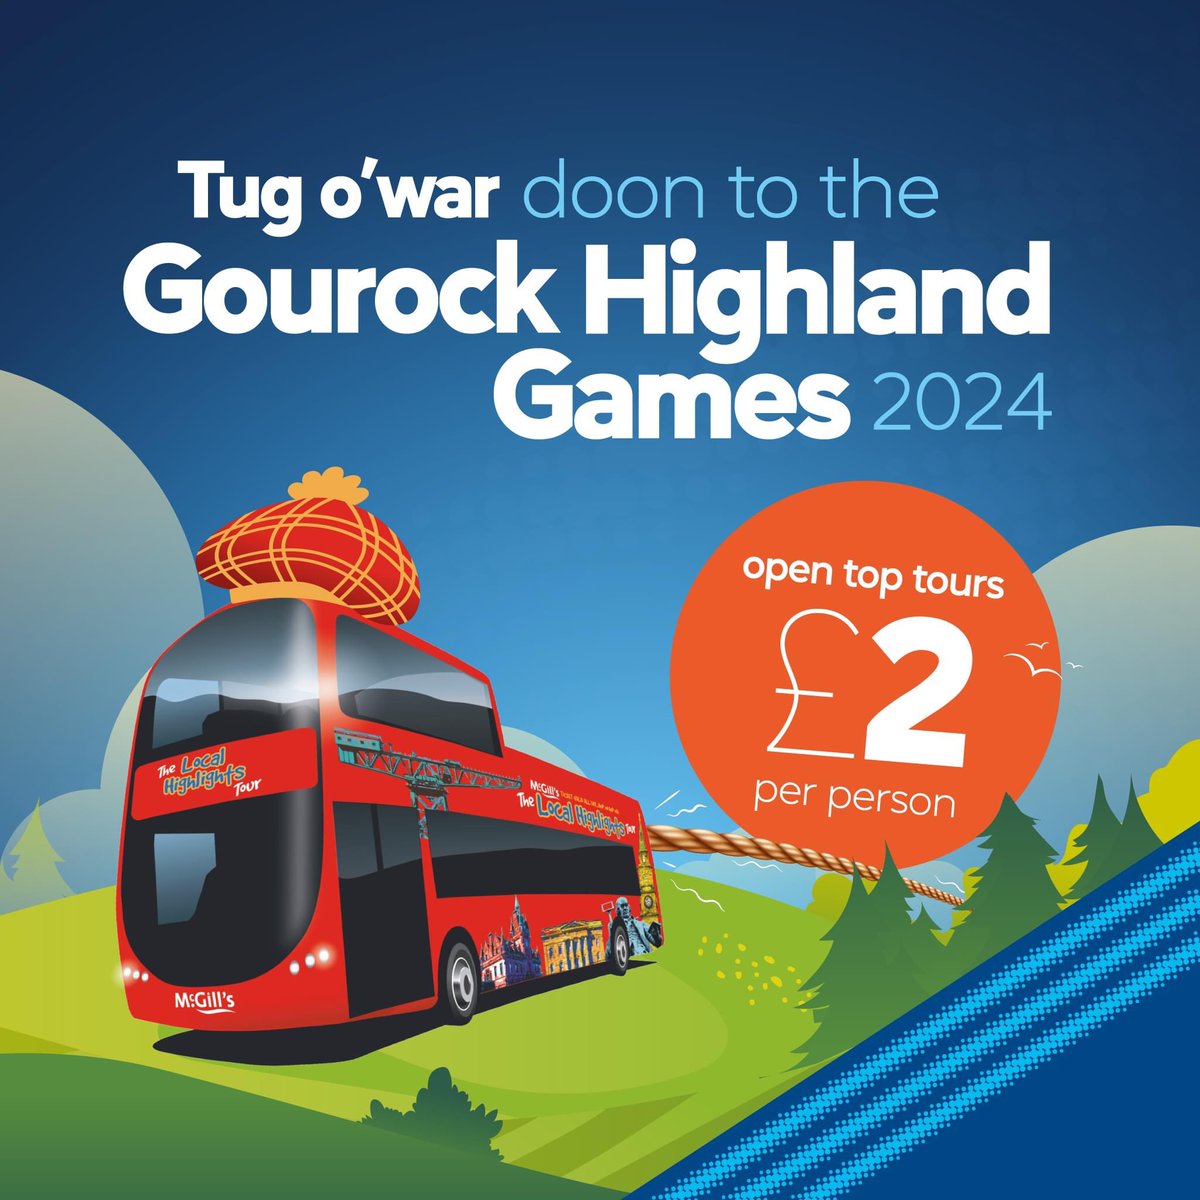 Enjoy the Gourock Highland Games TODAY at Battery Park 🏴󠁧󠁢󠁳󠁣󠁴󠁿 Free entry! Experience the bagpipes, traditional highland dancing and spectate the heavyweights. #ClydeFlyer 901 drops you off outside and our Open Top tour will take you around Gourock Bay! ℹ️ ow.ly/pXpO50RzJzP